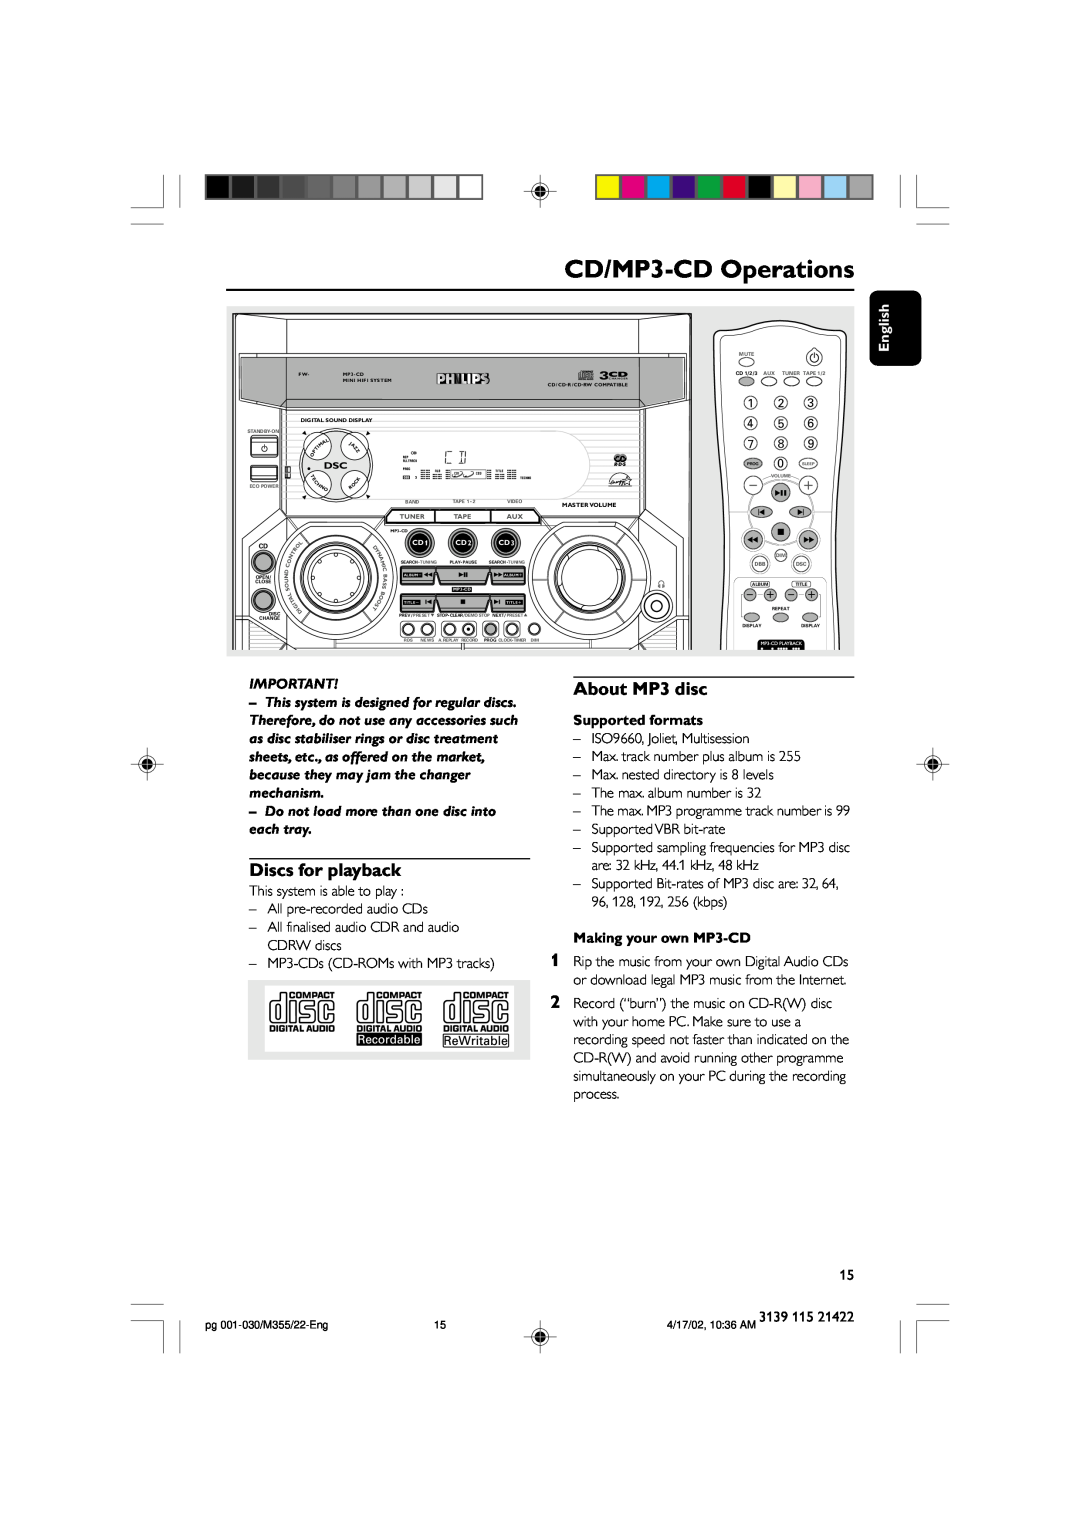 Philips FW-M355 manual CD/MP3-CDOperations, Discs for playback, About MP3 disc, Supported formats, Making your own MP3-CD 